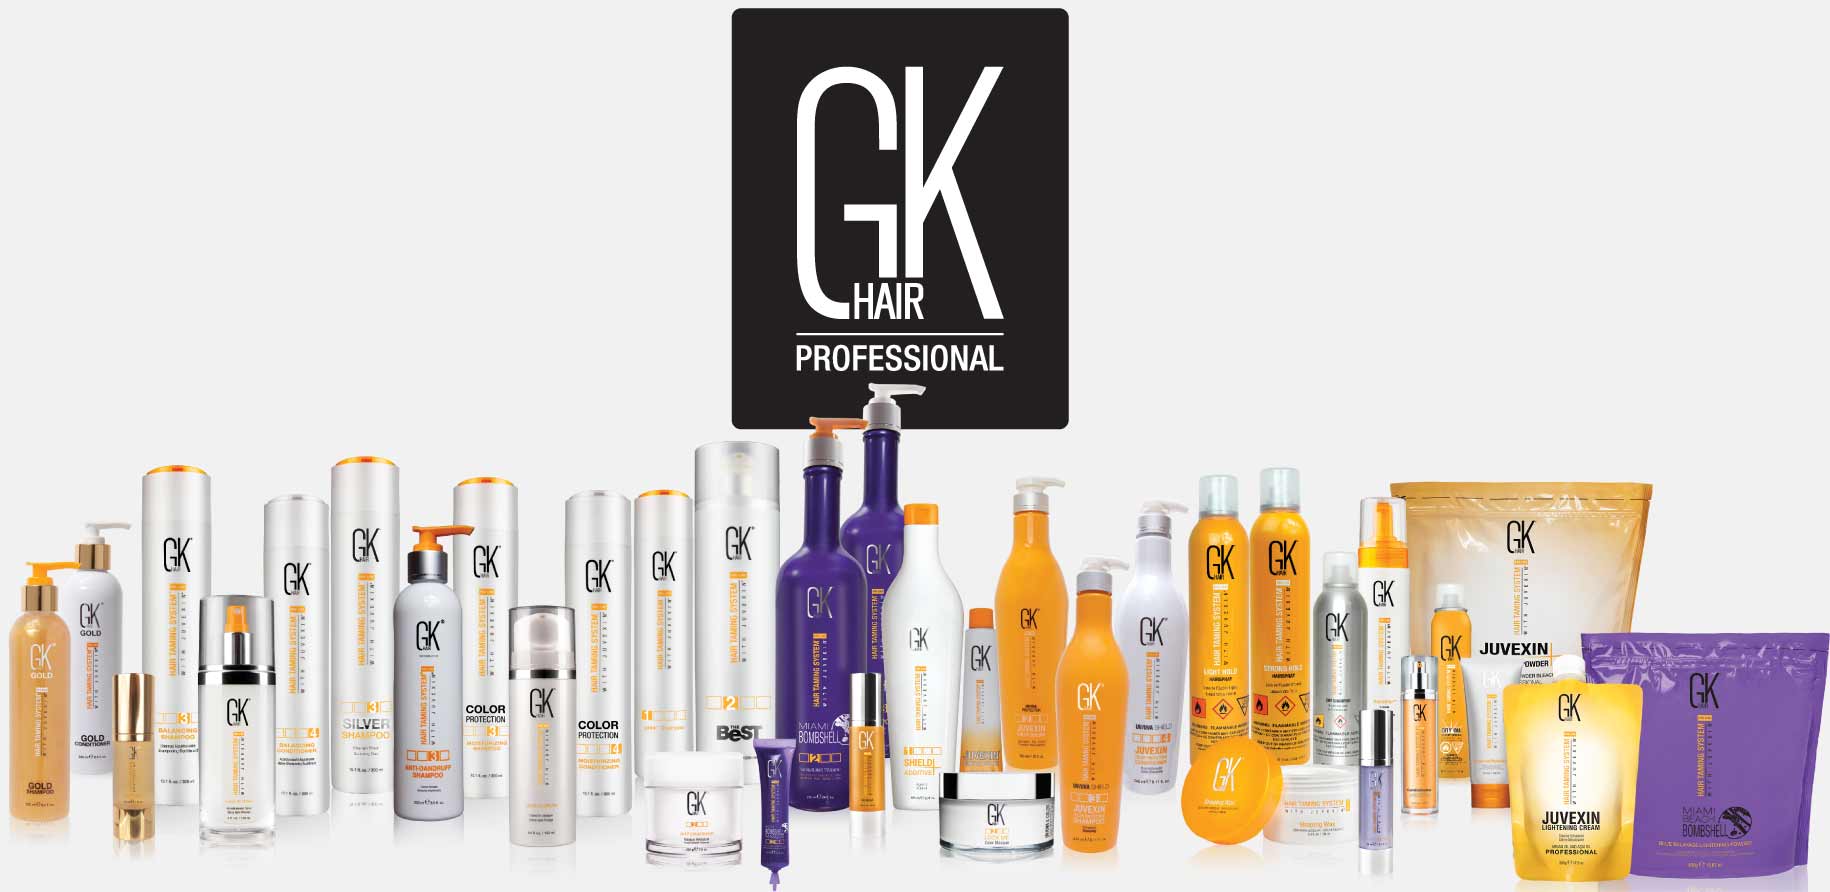 GKhair all product line is available in cosmeticatrading